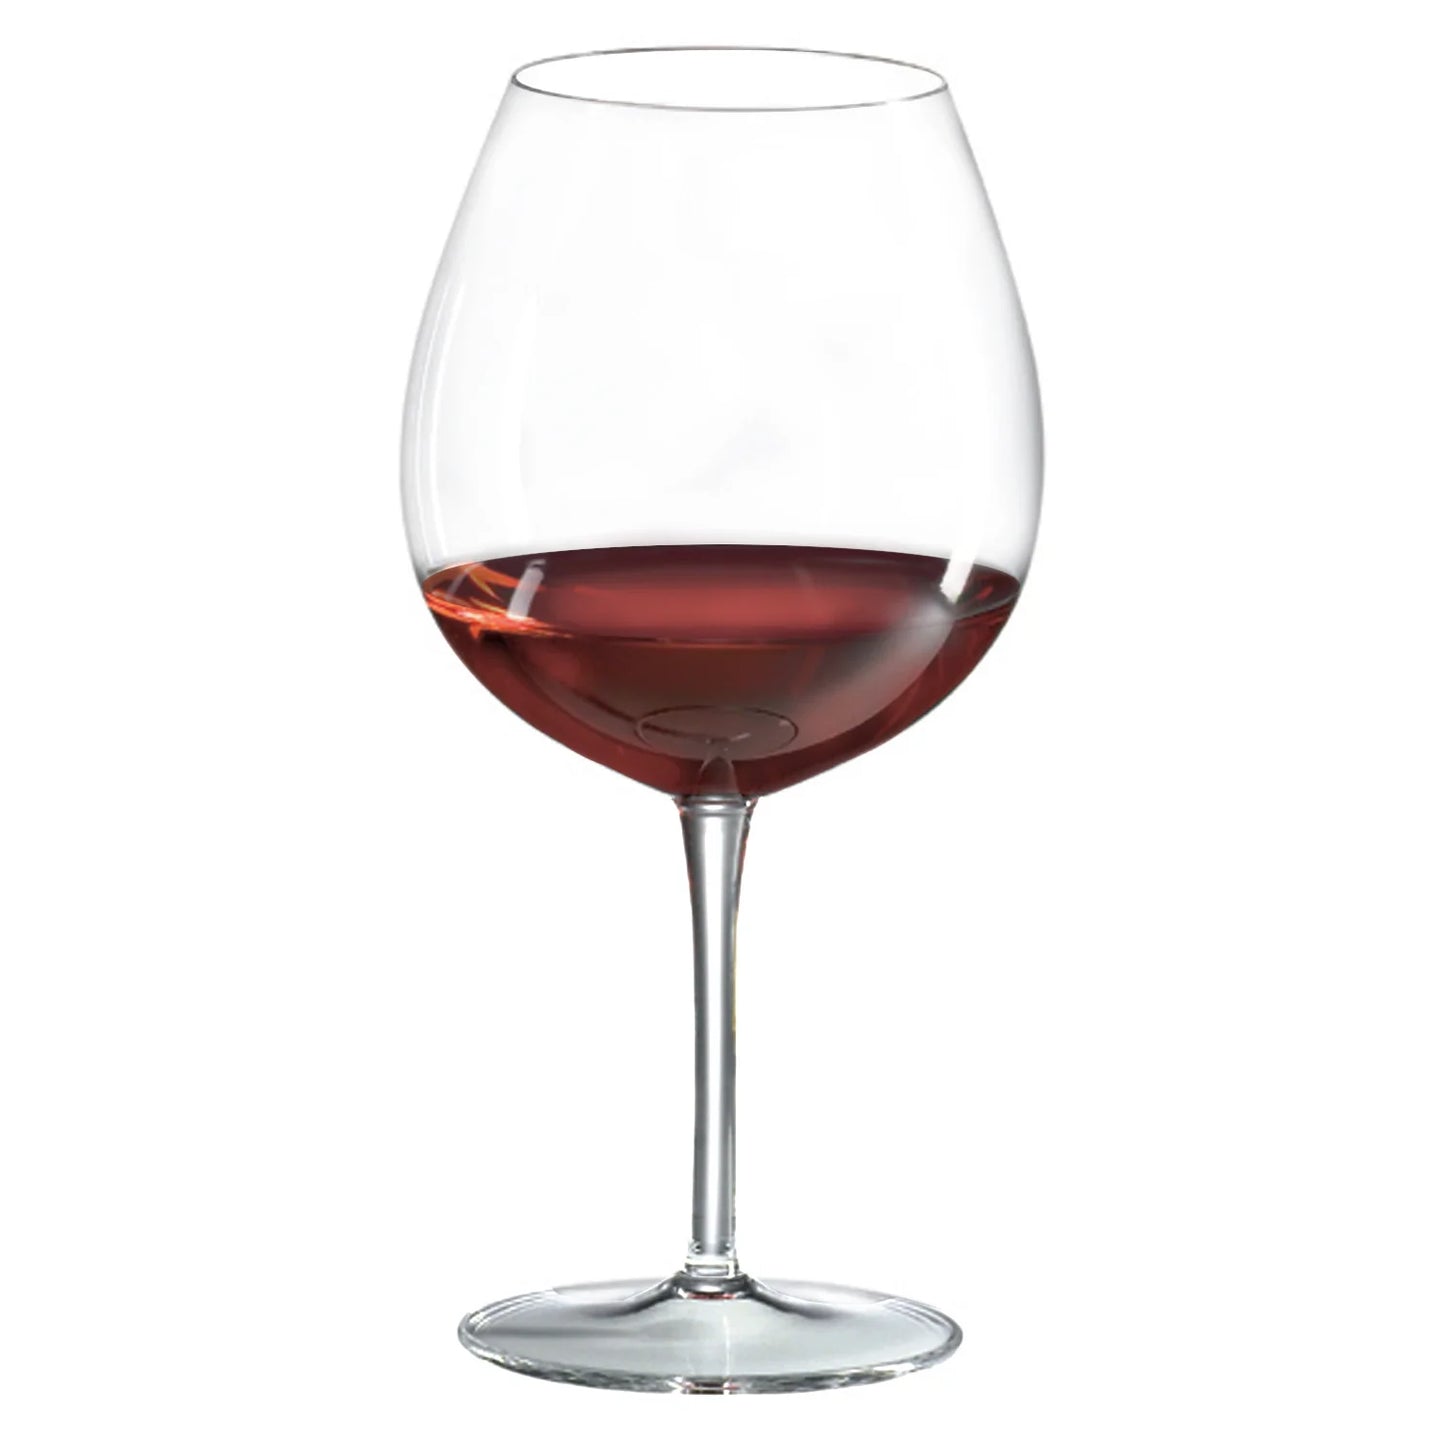 Ravenscroft Classics Burgundy Glass (Set of 4) with Free Microfiber Cleaning Cloth W6125